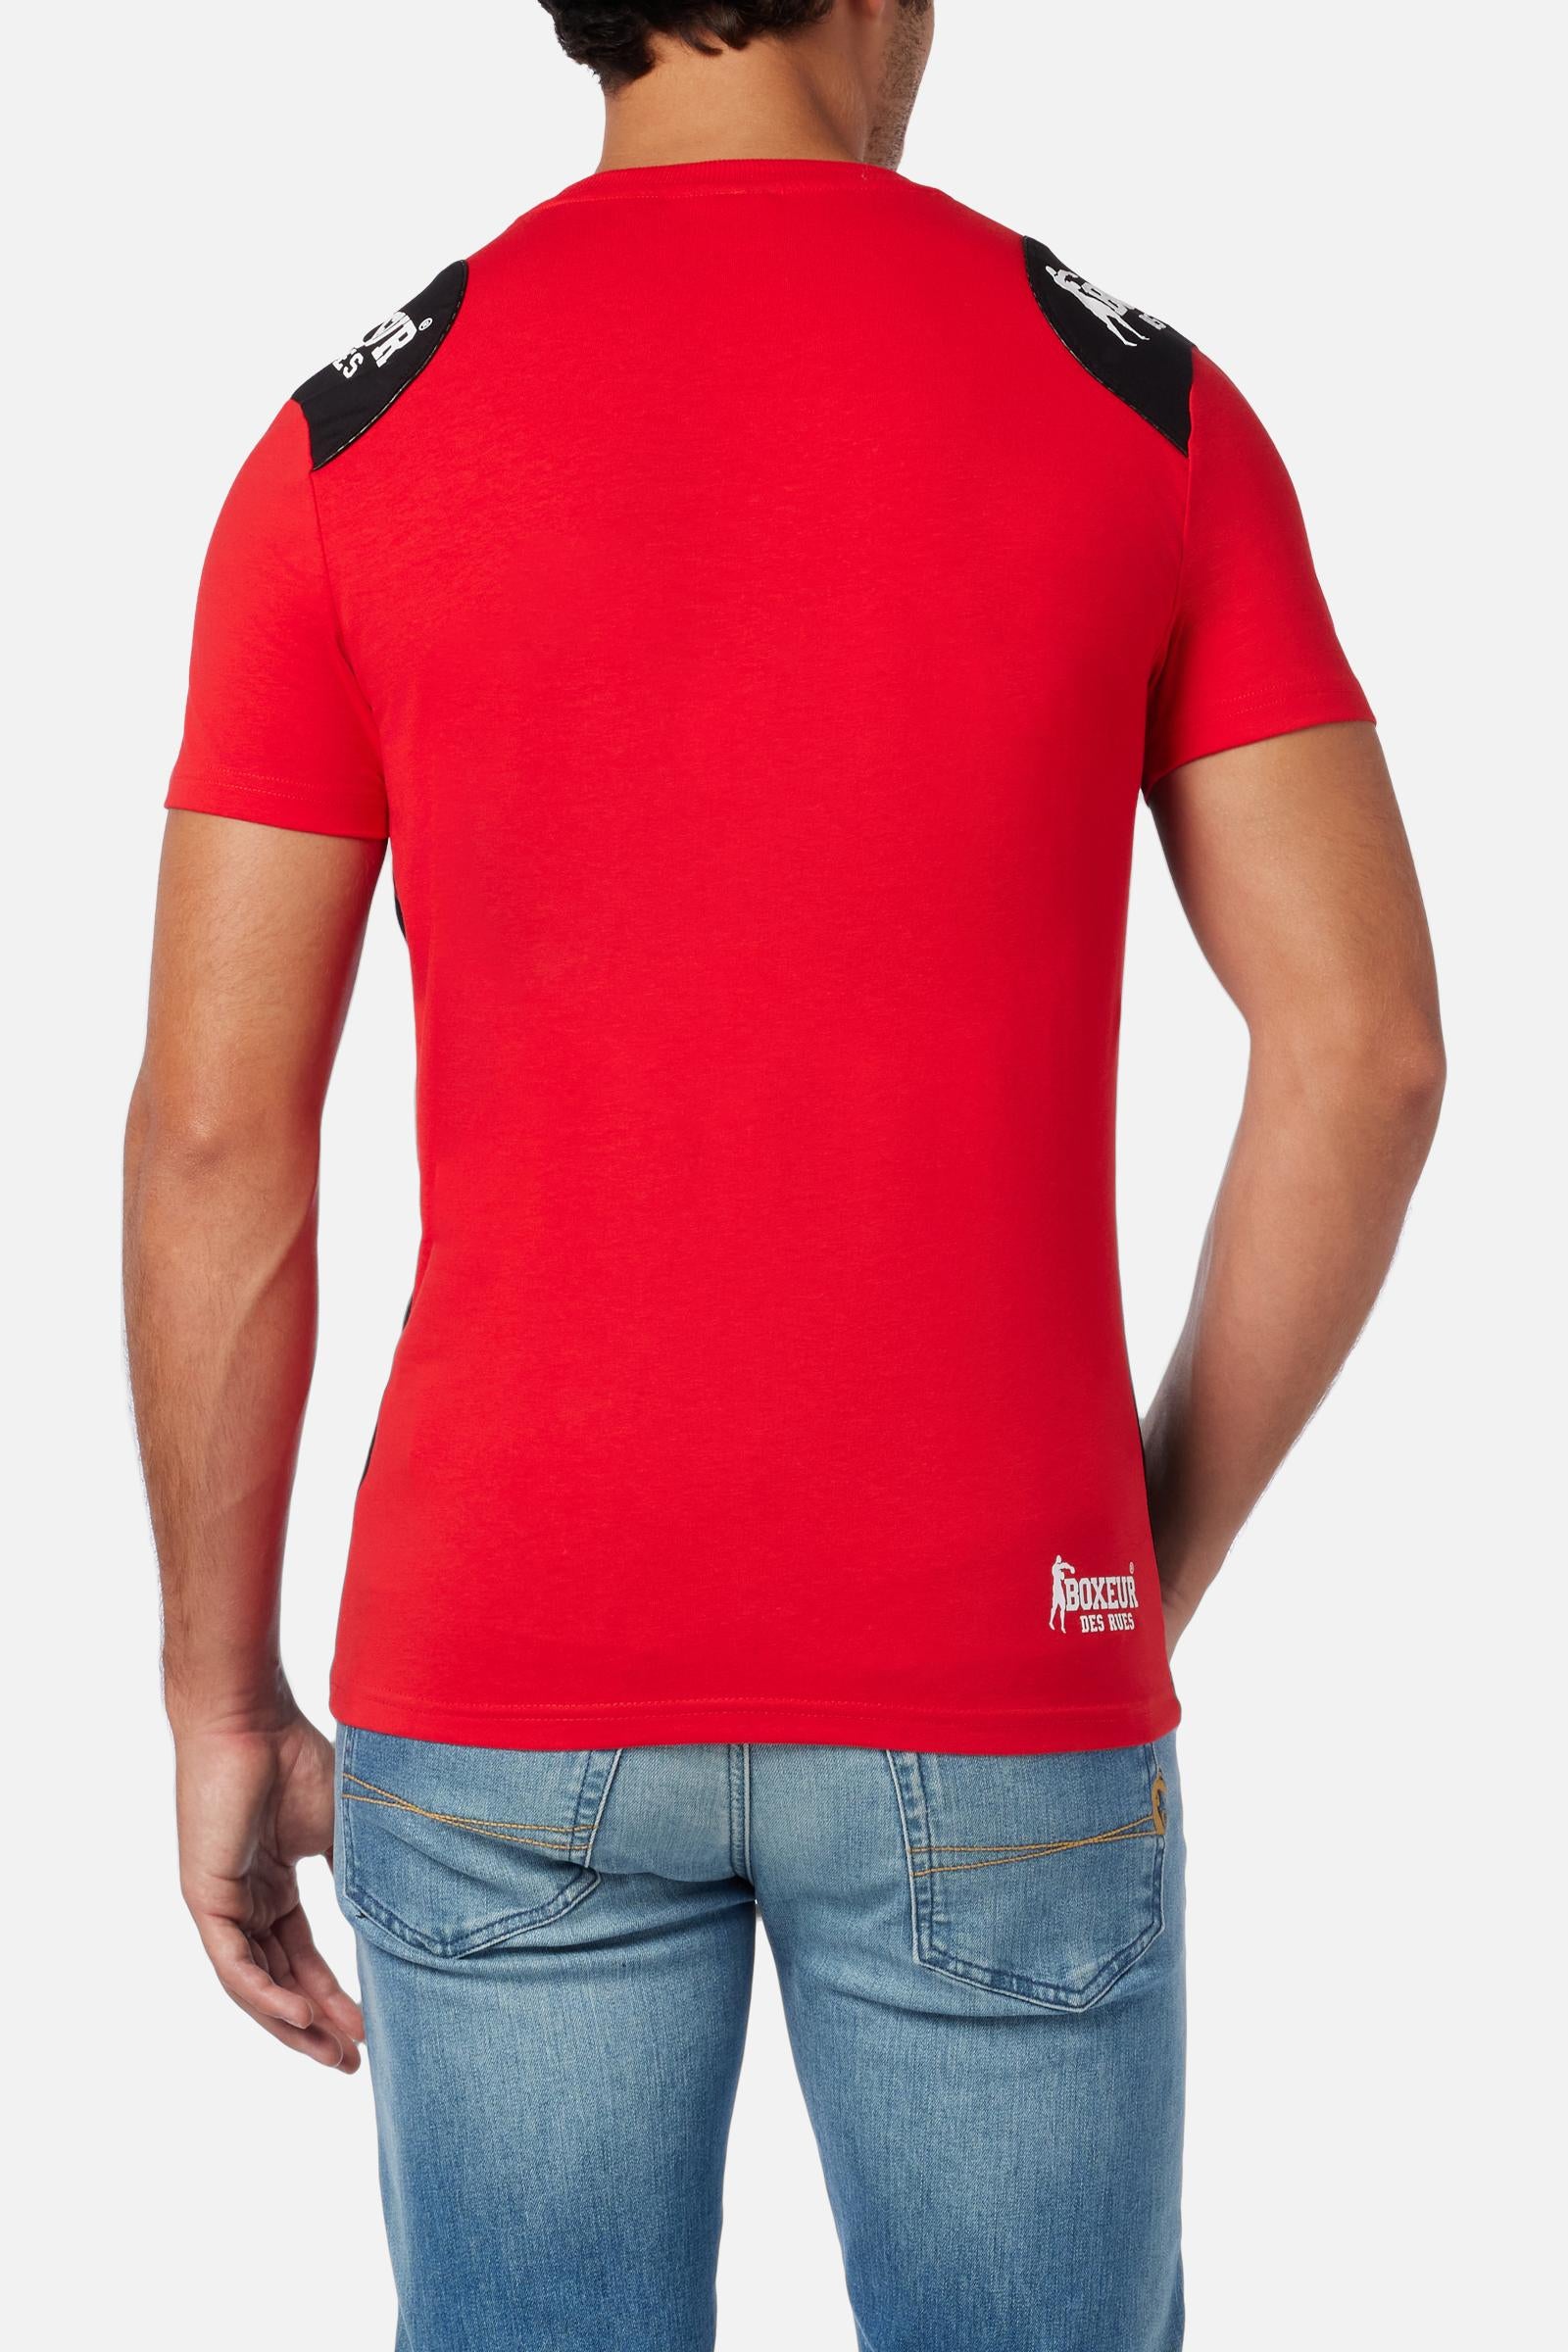 Colour Block Printed T-Shirt in Red T-Shirts Boxeur des Rues   